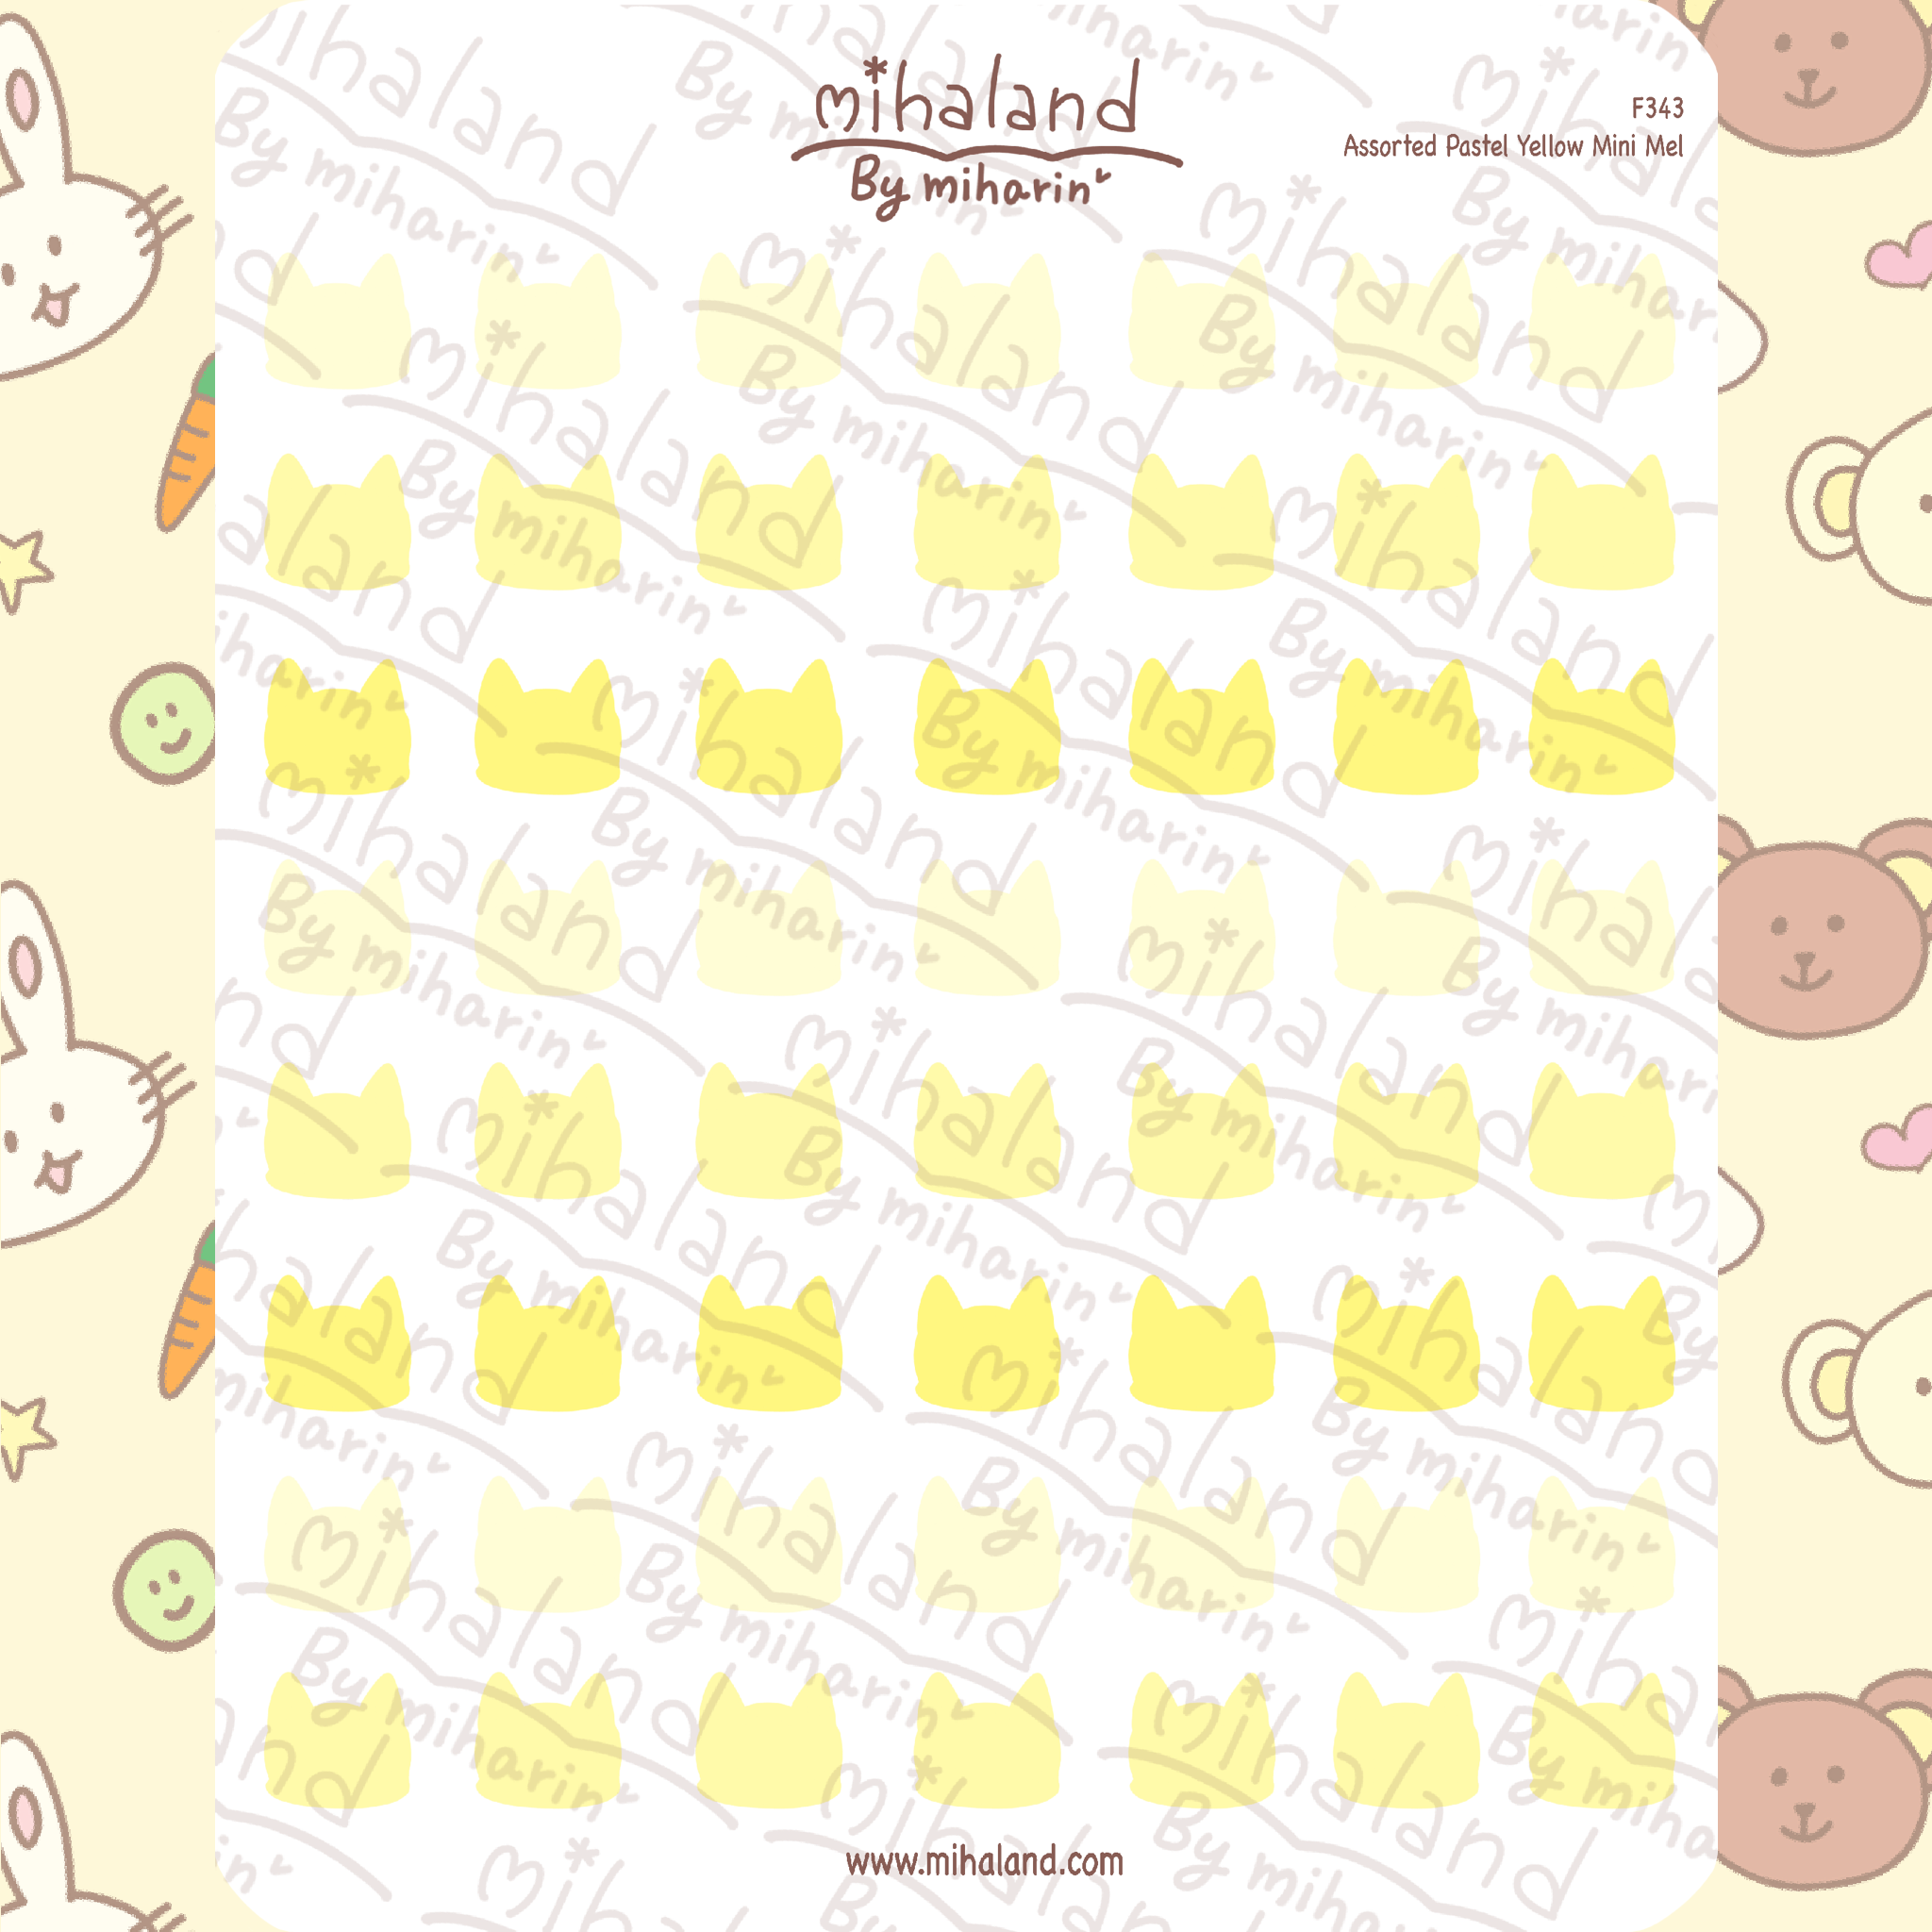 Assorted Pastel Yellow Mini Mel Planner Stickers (F343)